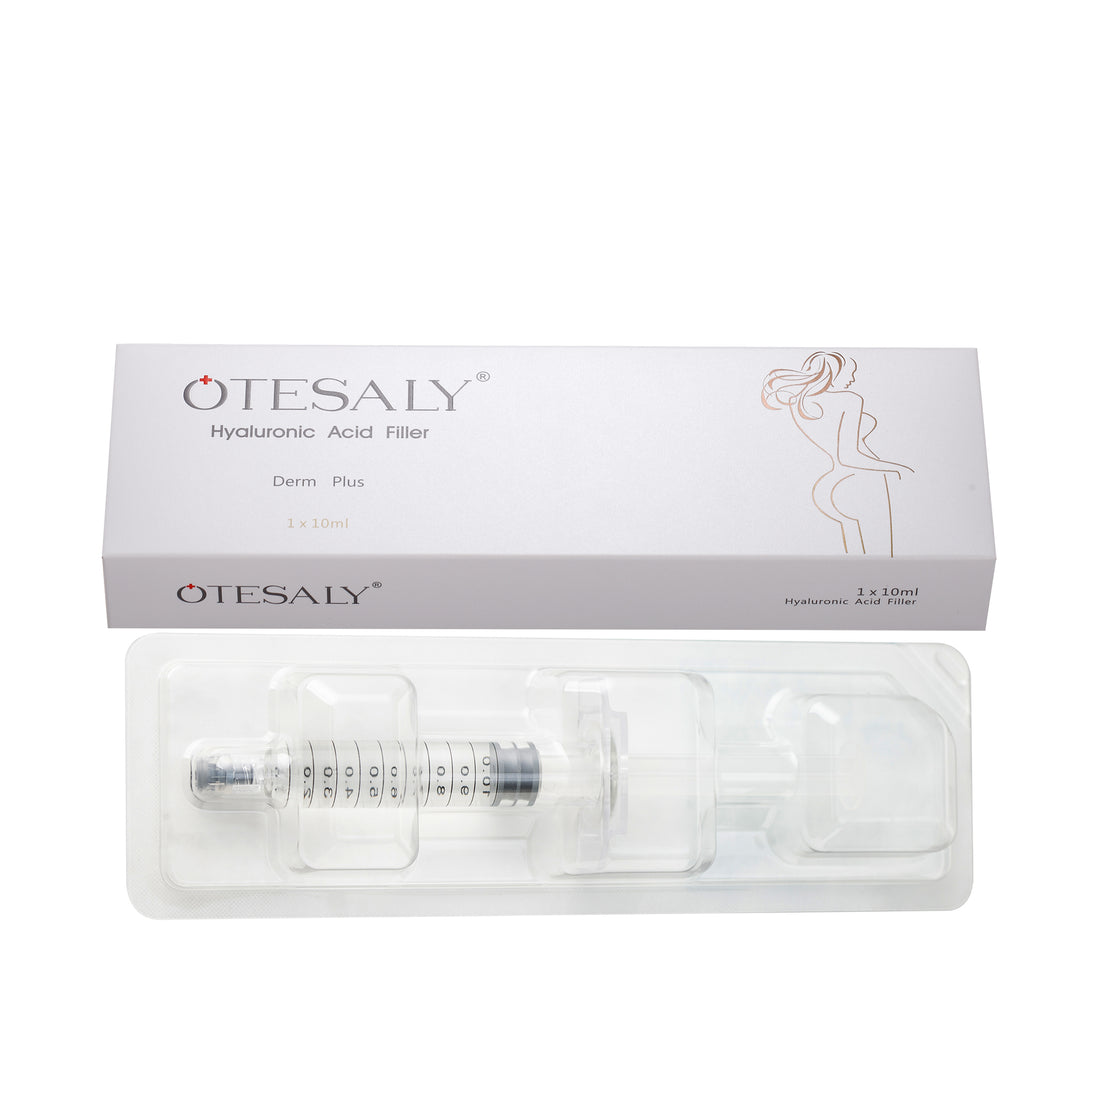 Otesaly Body Filler for breast &amp; buttock augmentation